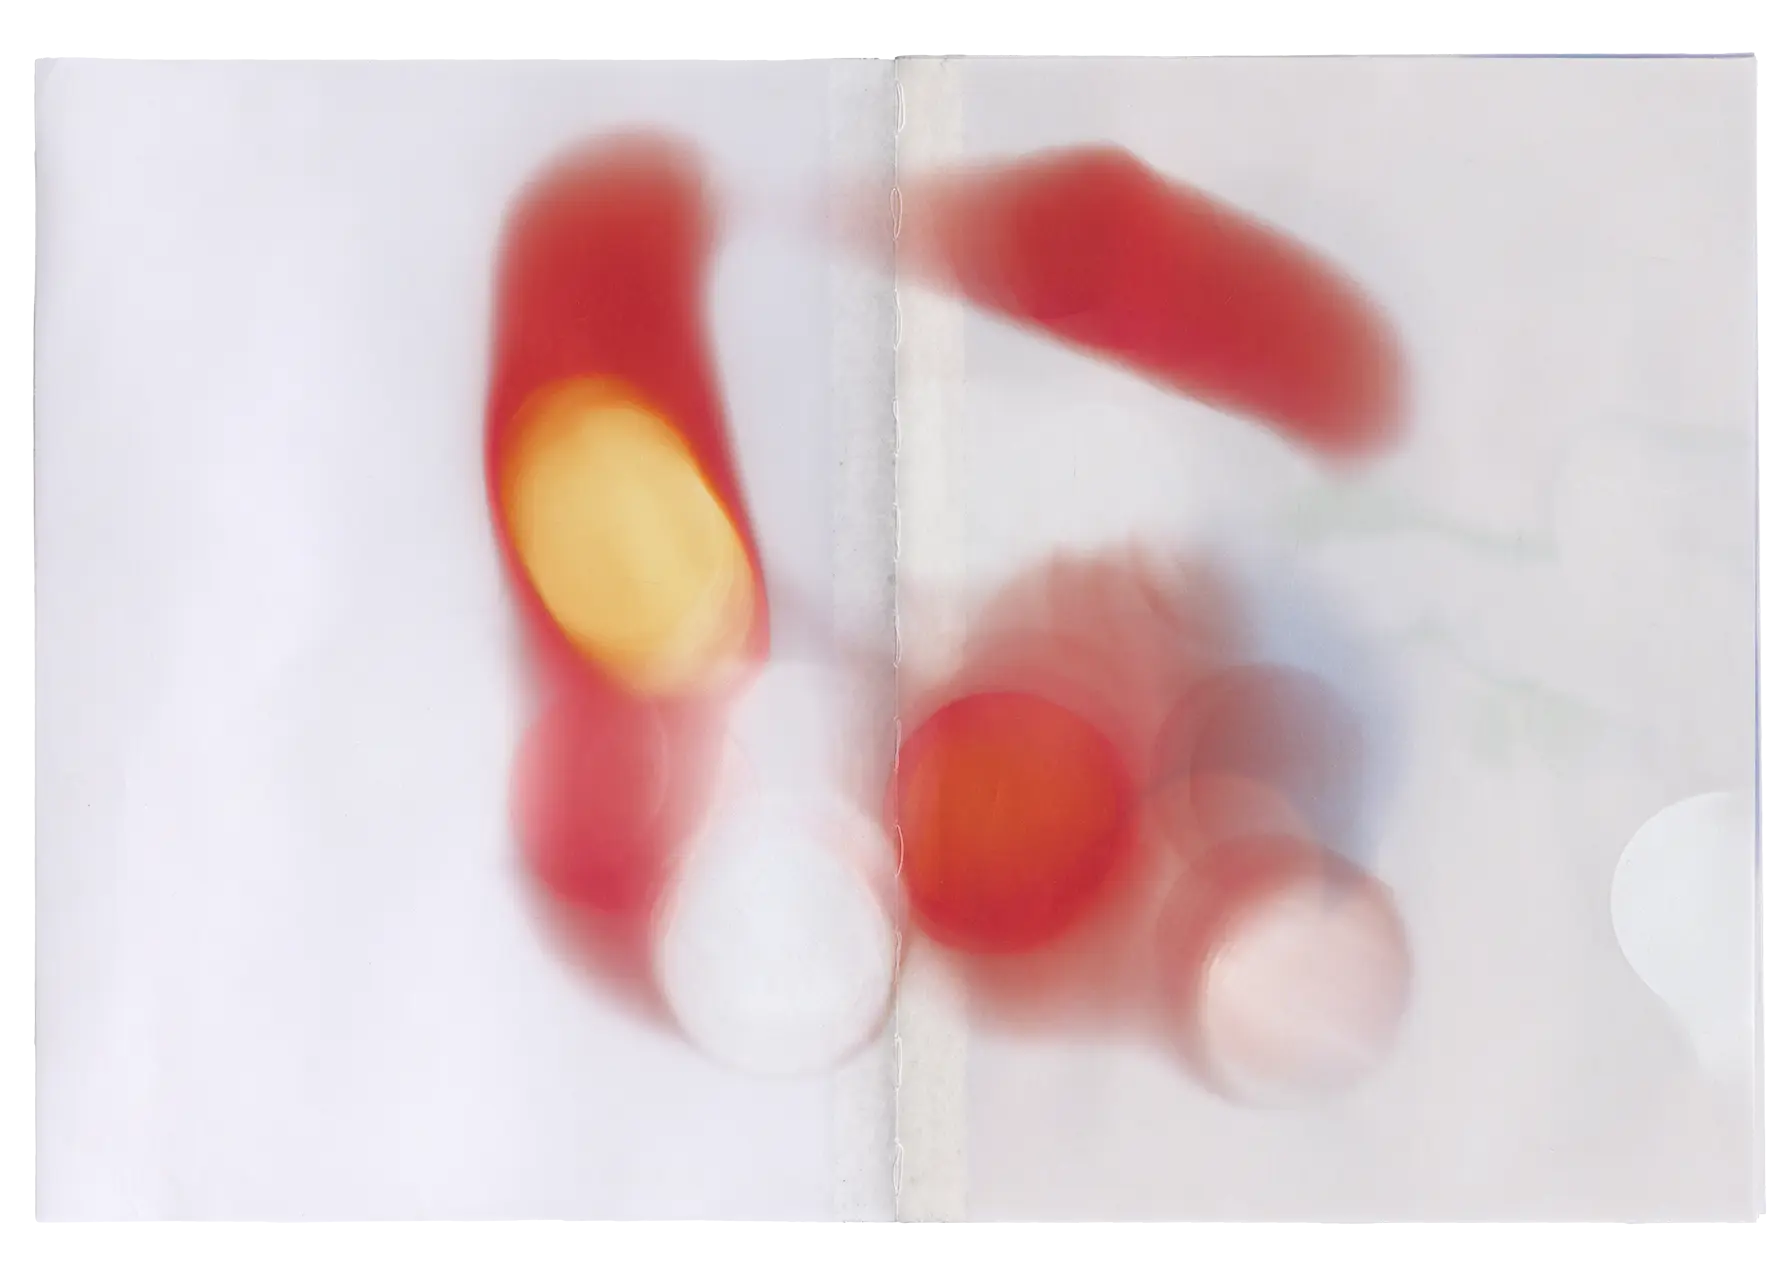 First spread of the Bloom book, in this spread is the blur and extracted bloom of a car’s rear brake light. Notably, the images were printed using a UV printer directly onto the pre-bound pages. As a result, the binding thread in the book's seam has taken on some of the color from the images.